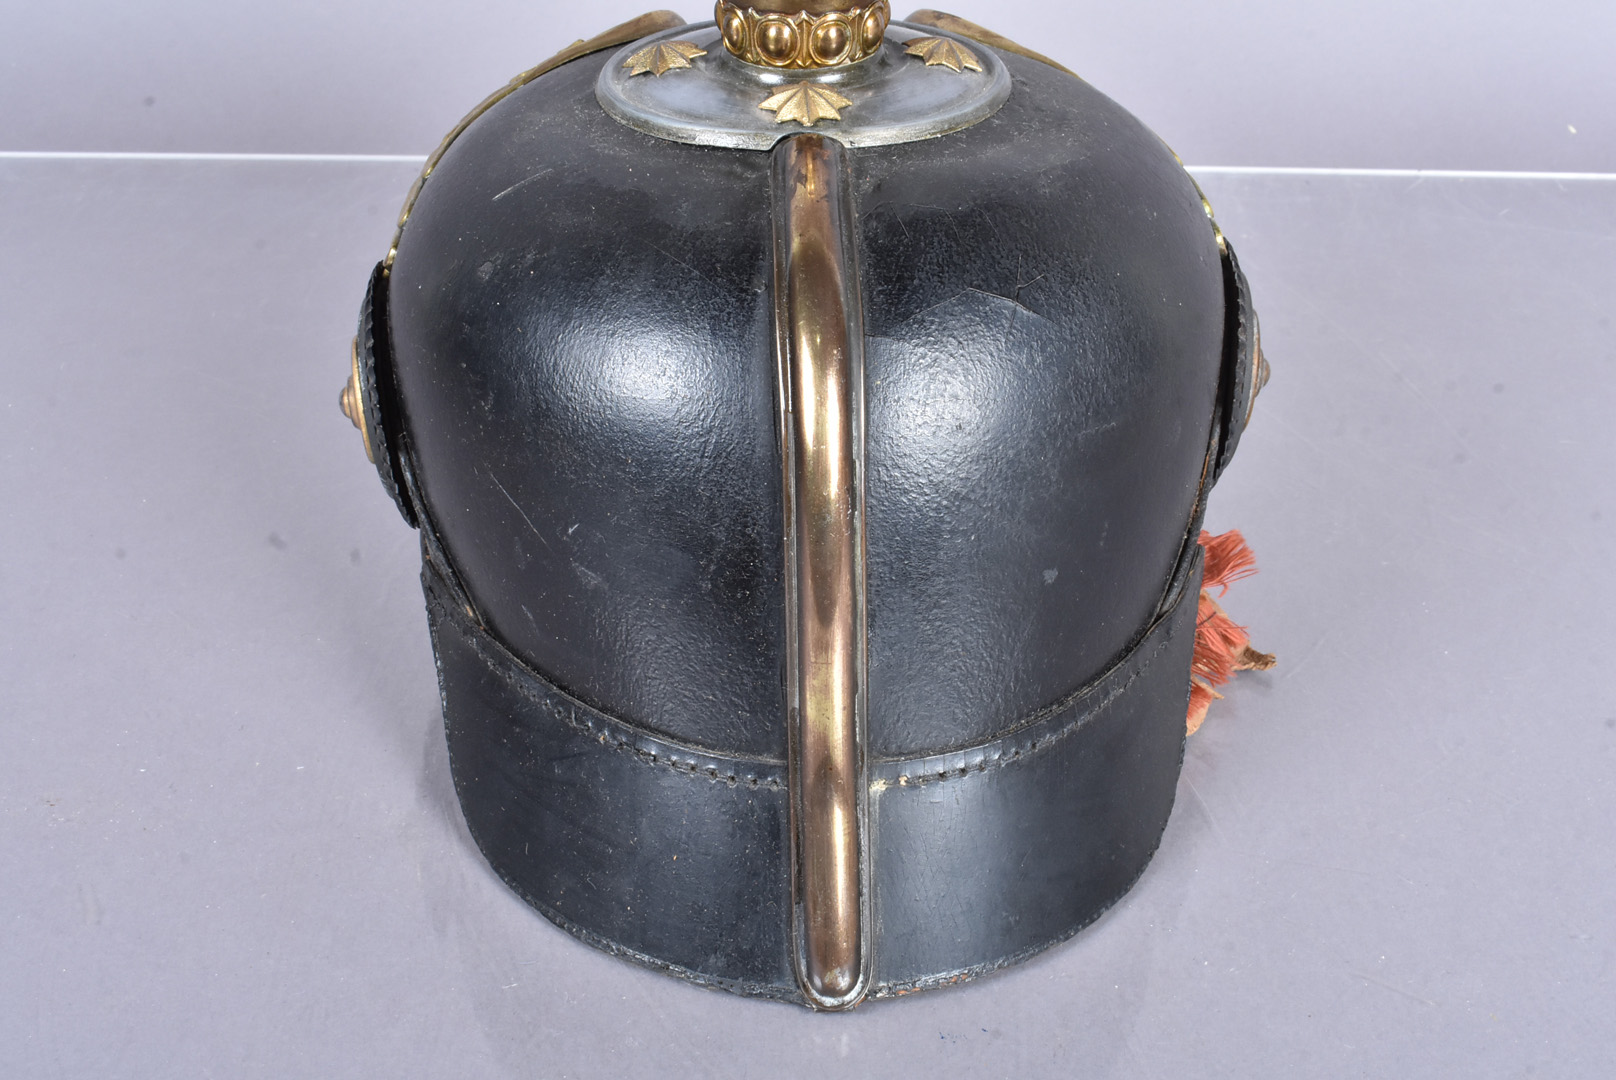 A Prussian Garde Officer's Private Purchase Pickelhaube, with brass ball top, with four star rivets, - Image 6 of 7